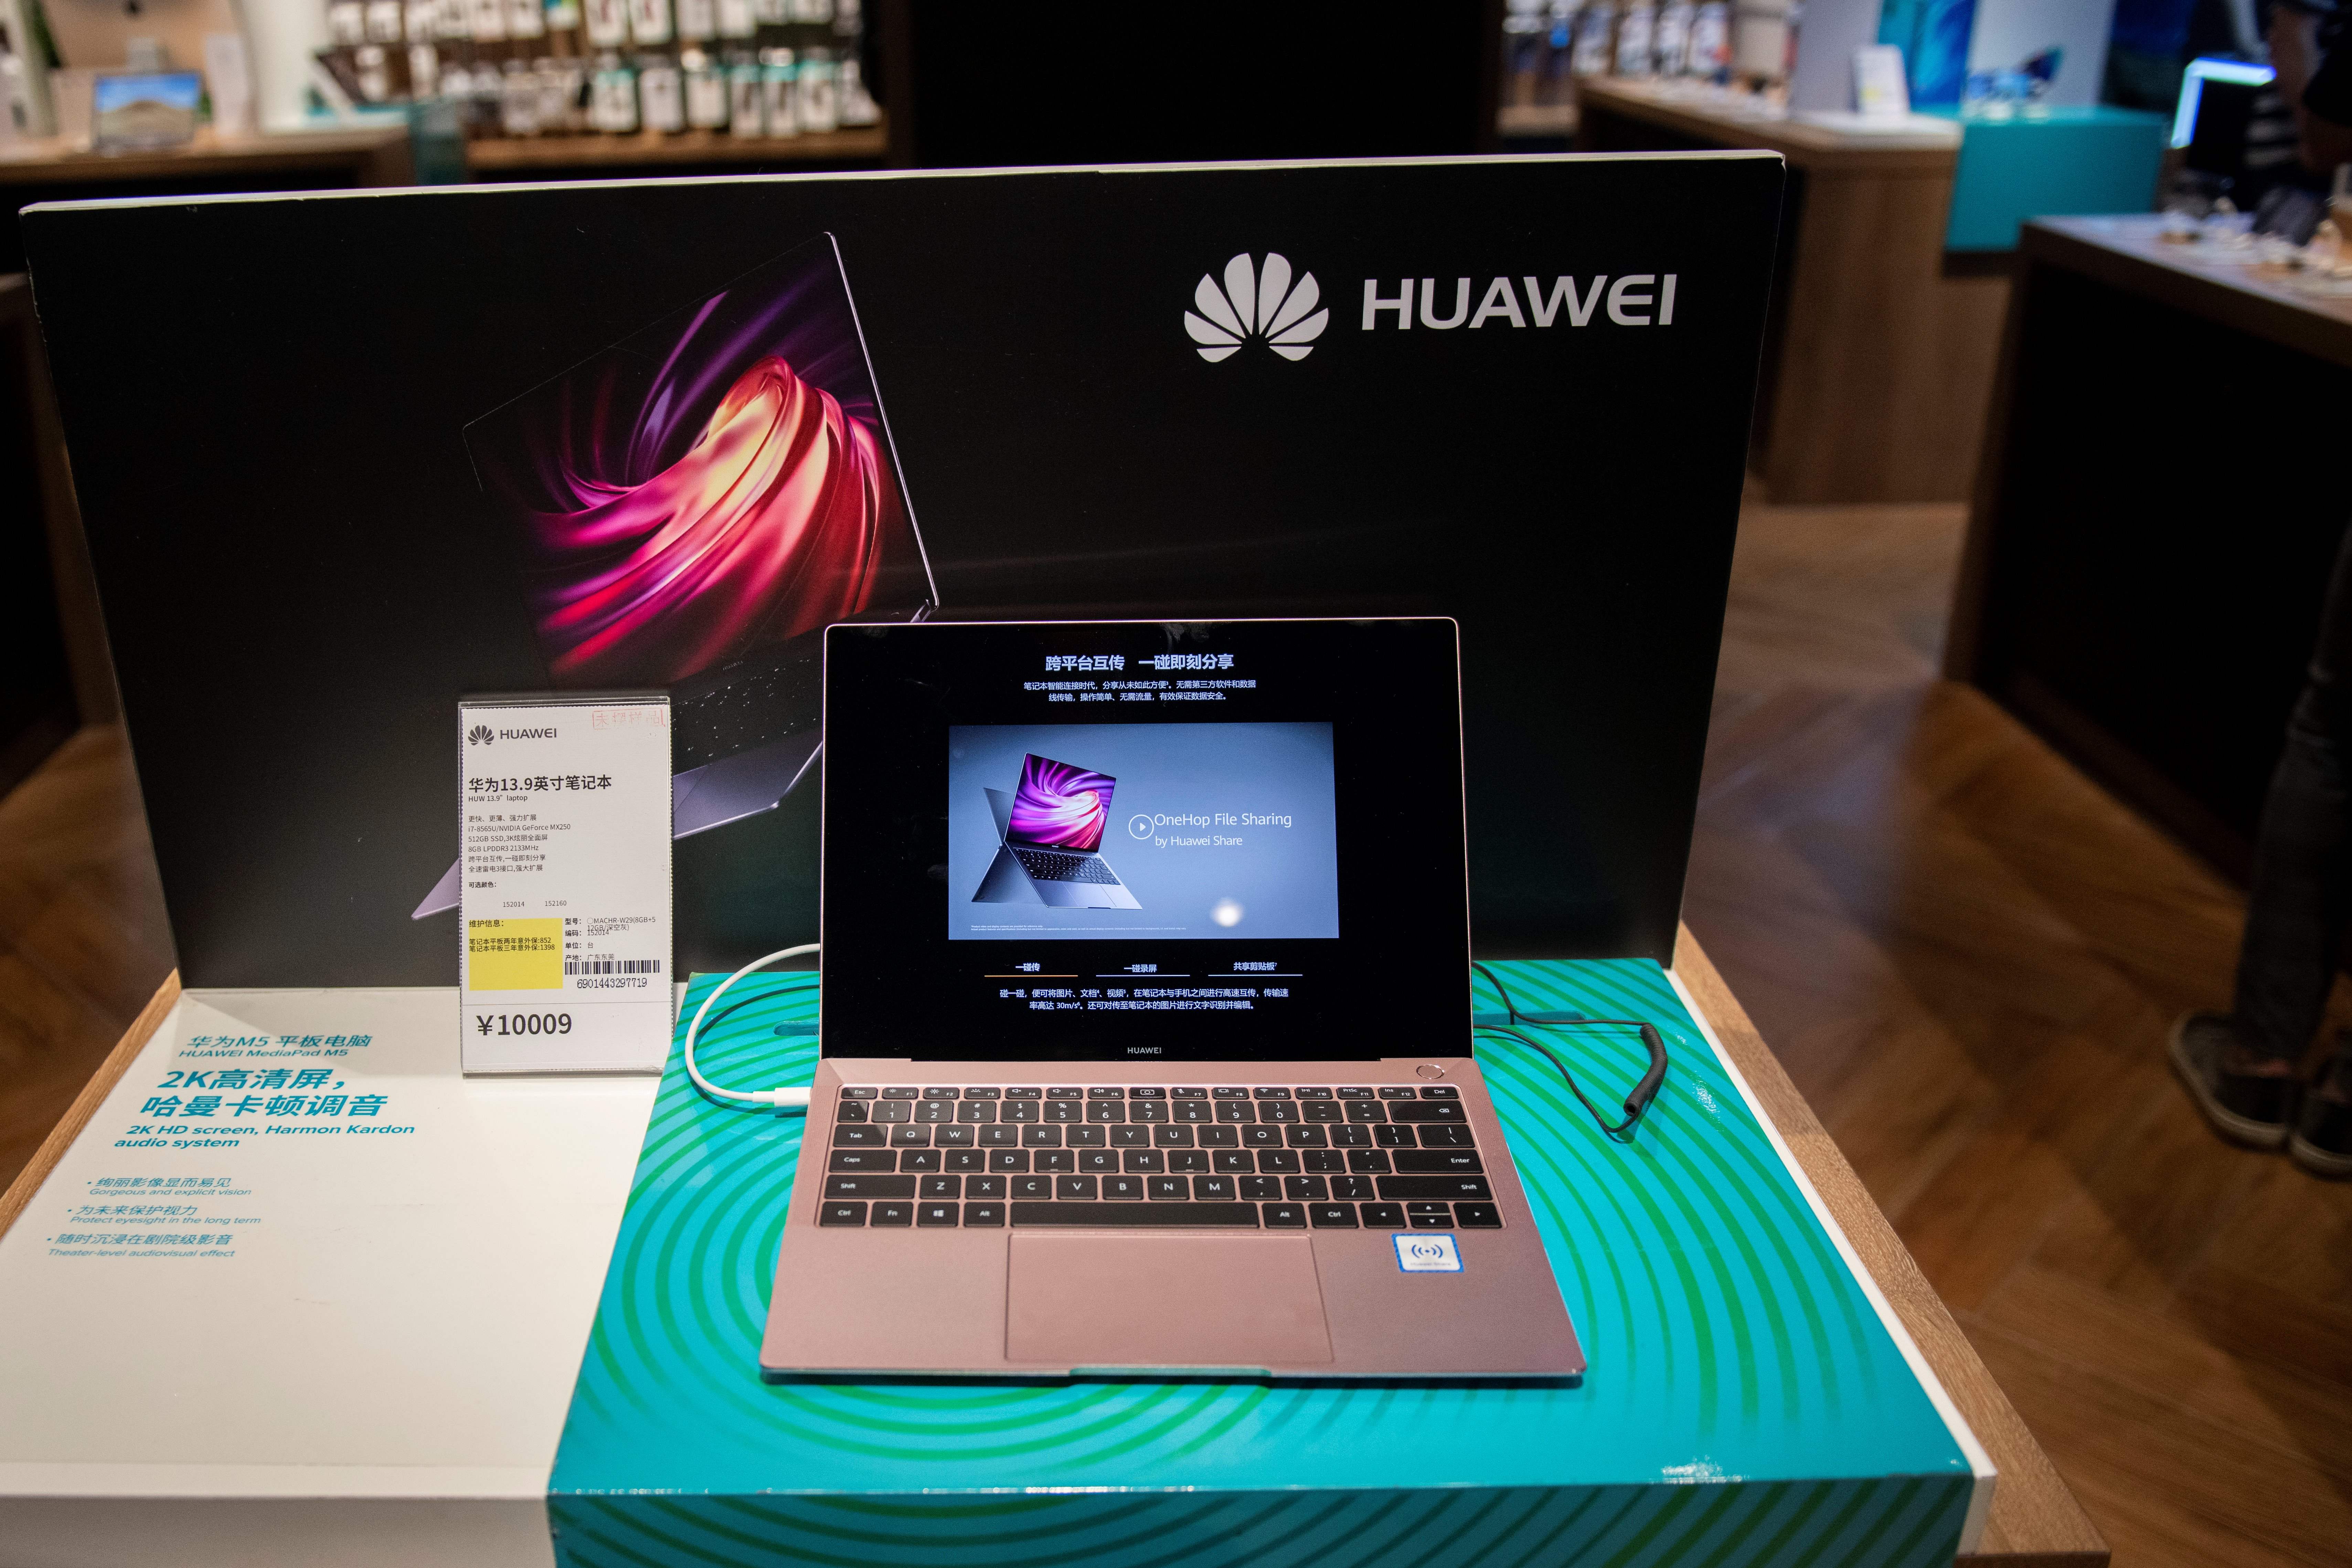 A Huawei computer is displayed in a retail store in Beijing on May 21, 2019. (NICOLAS ASFOURI/AFP/Getty Images)